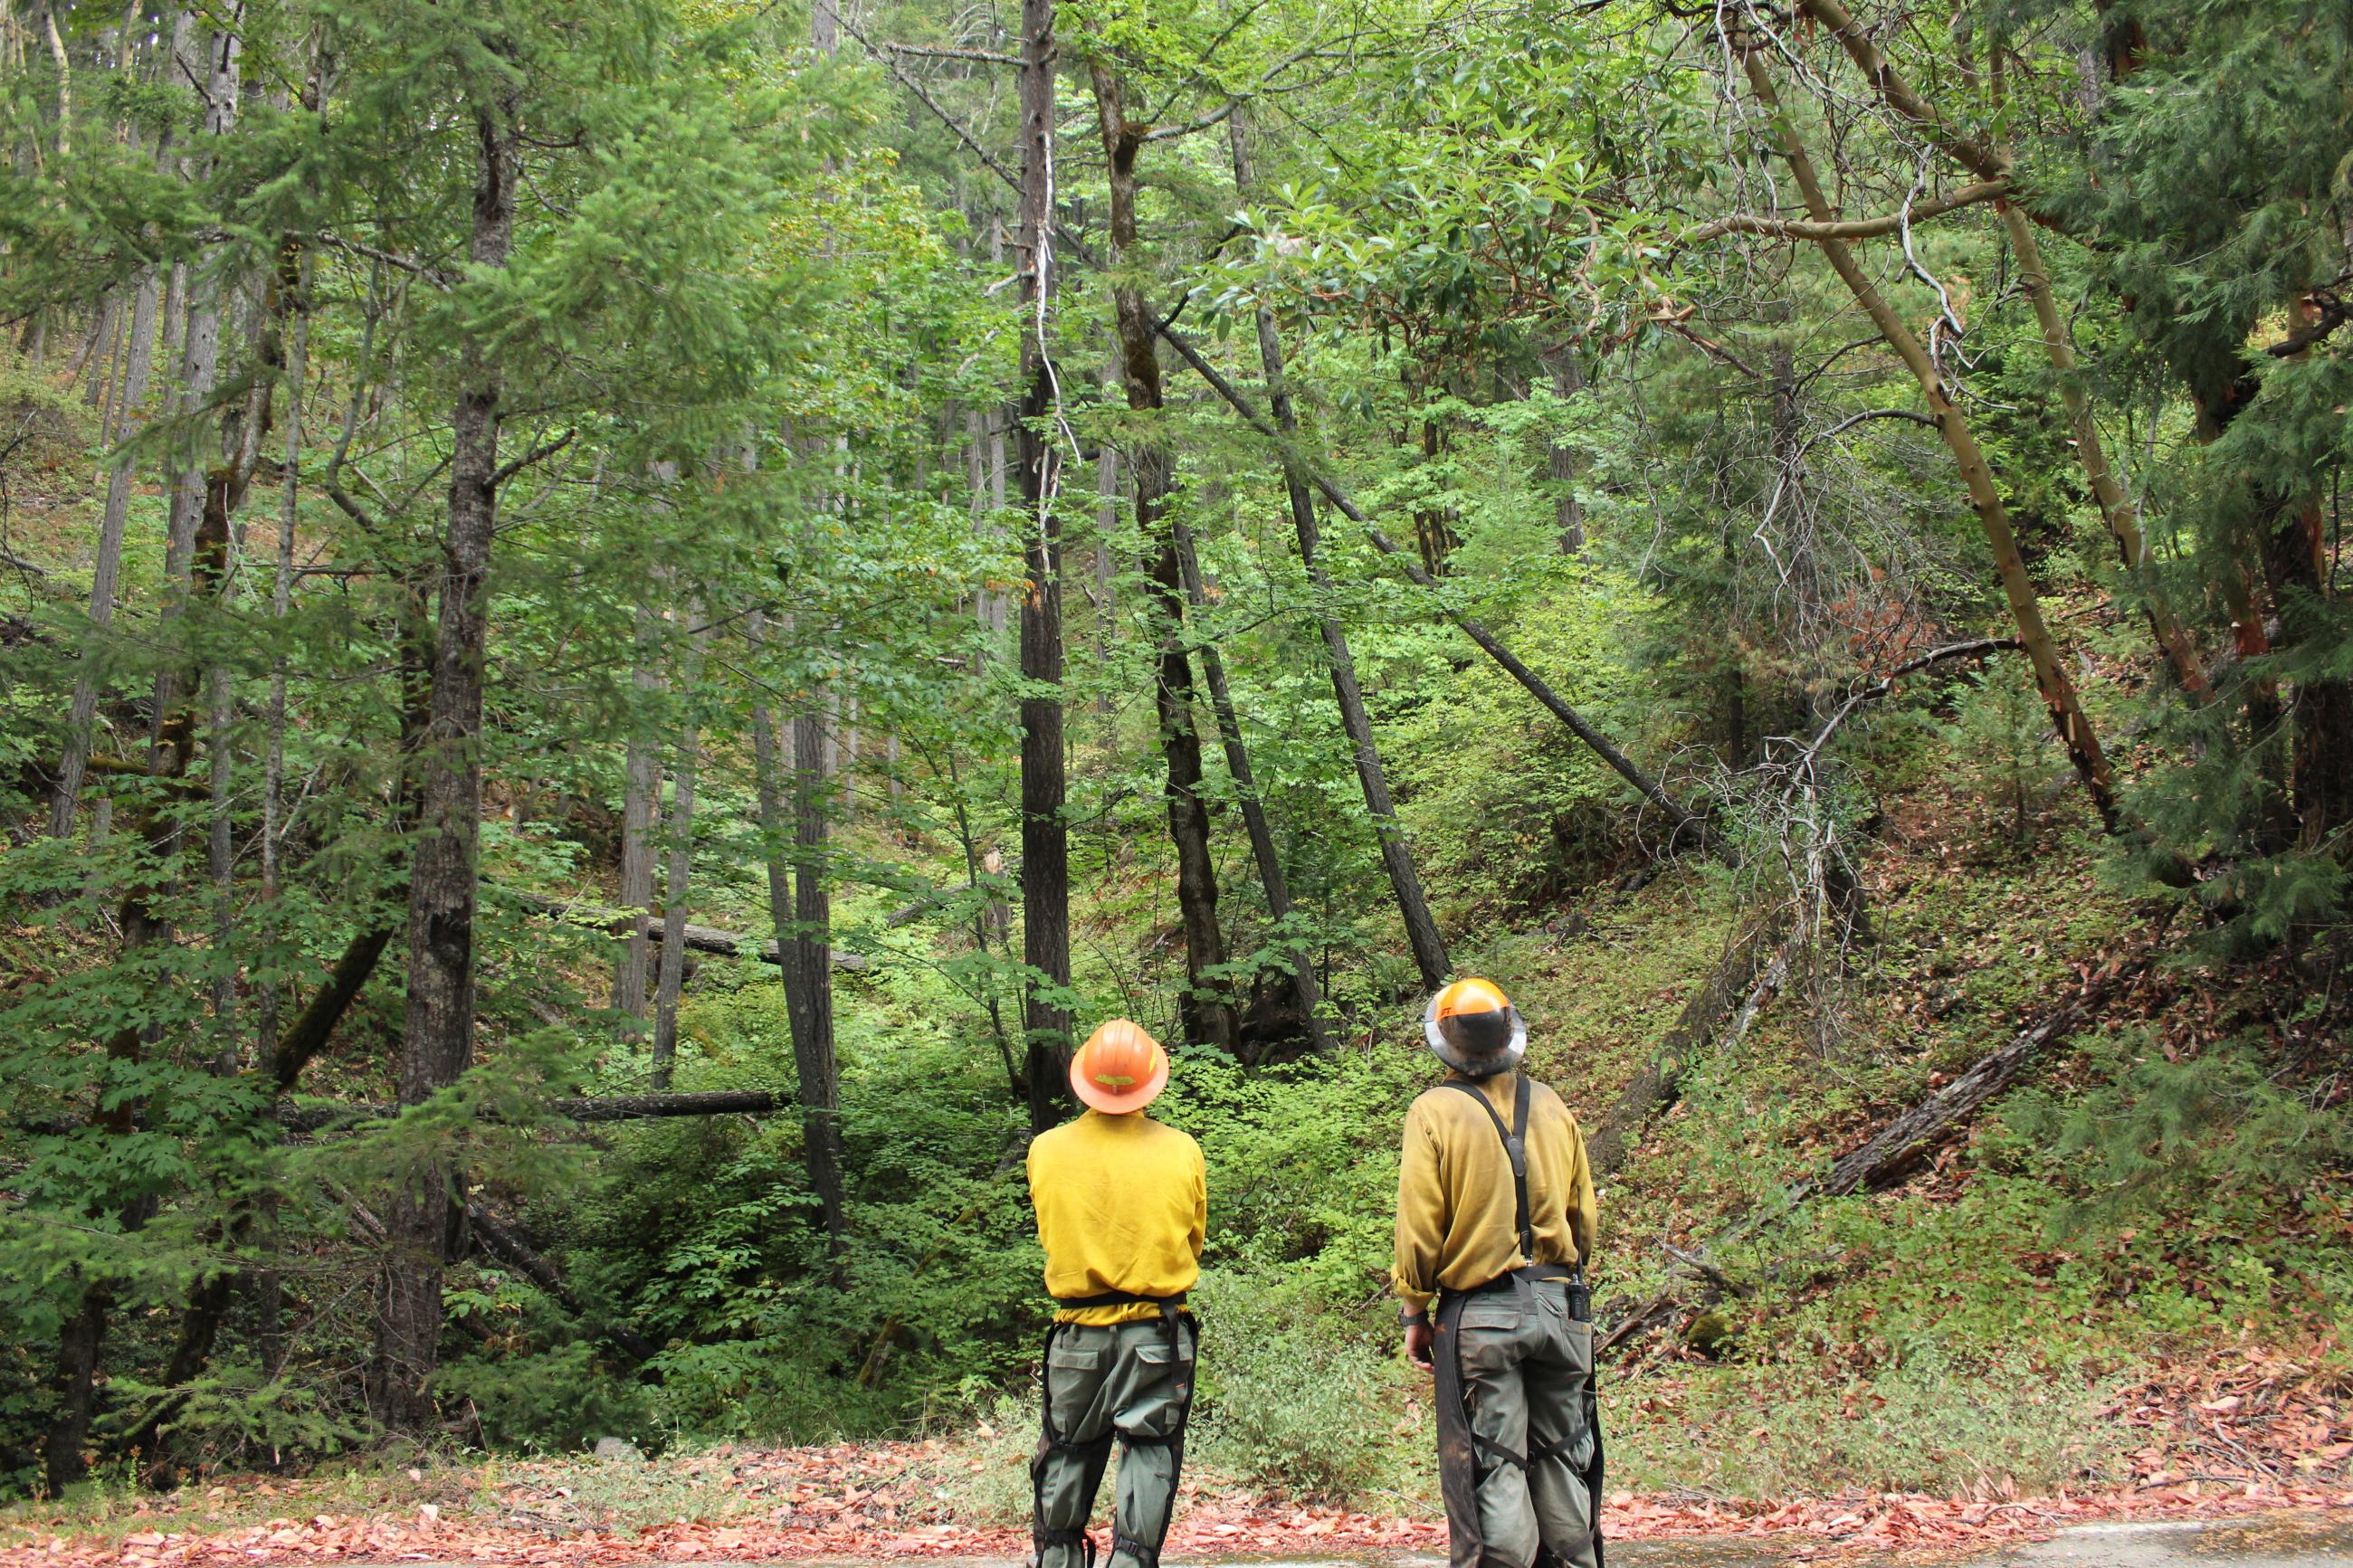 Two firefighters evaluating trees, some of which appear dead and/or are leaning